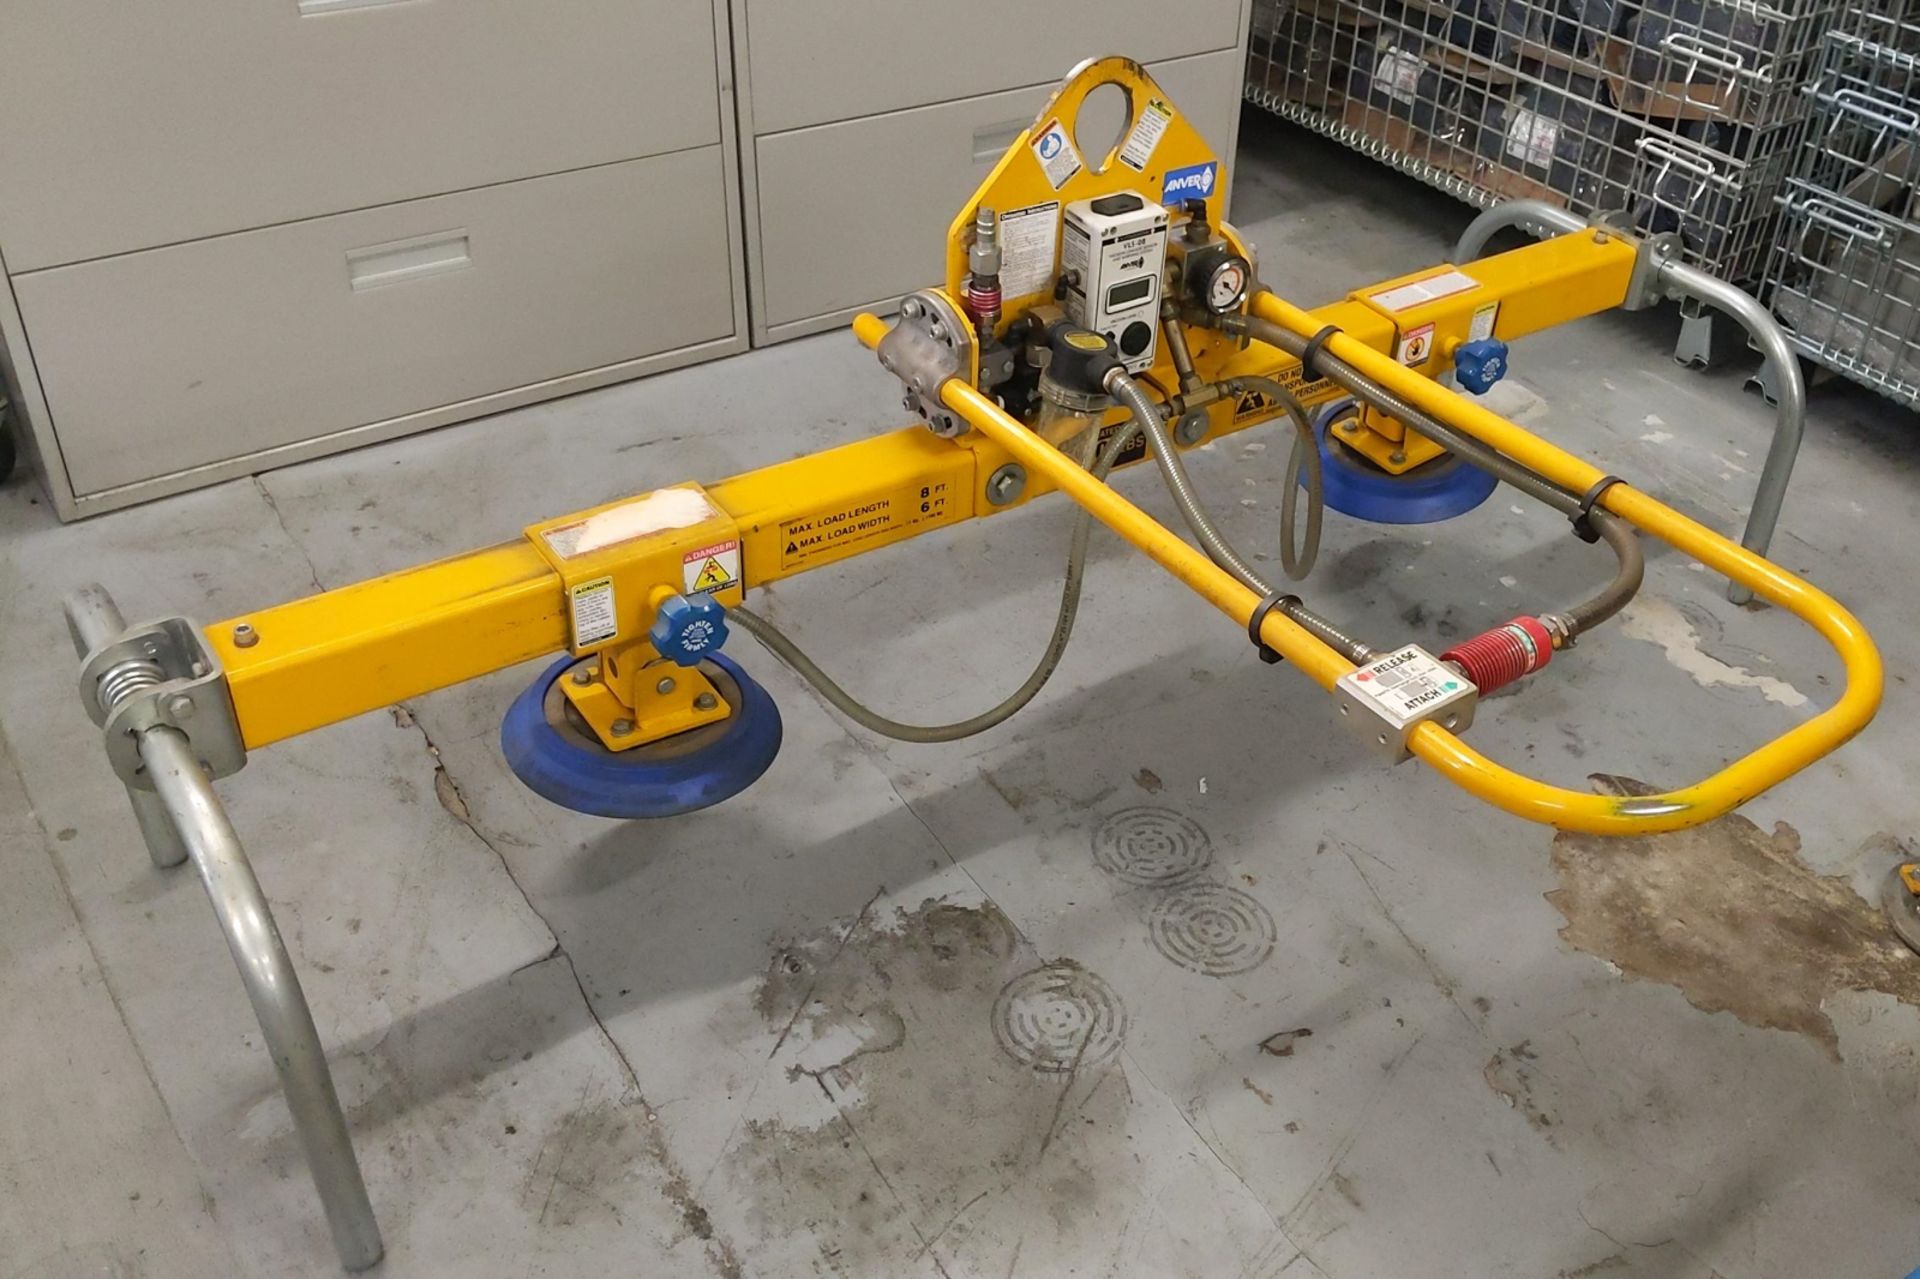 ANVER (2014) VPFL4-20-AIR-T-L VACUUM LIFTER WITH 500 LBS CAPACITY, S/N 0006478